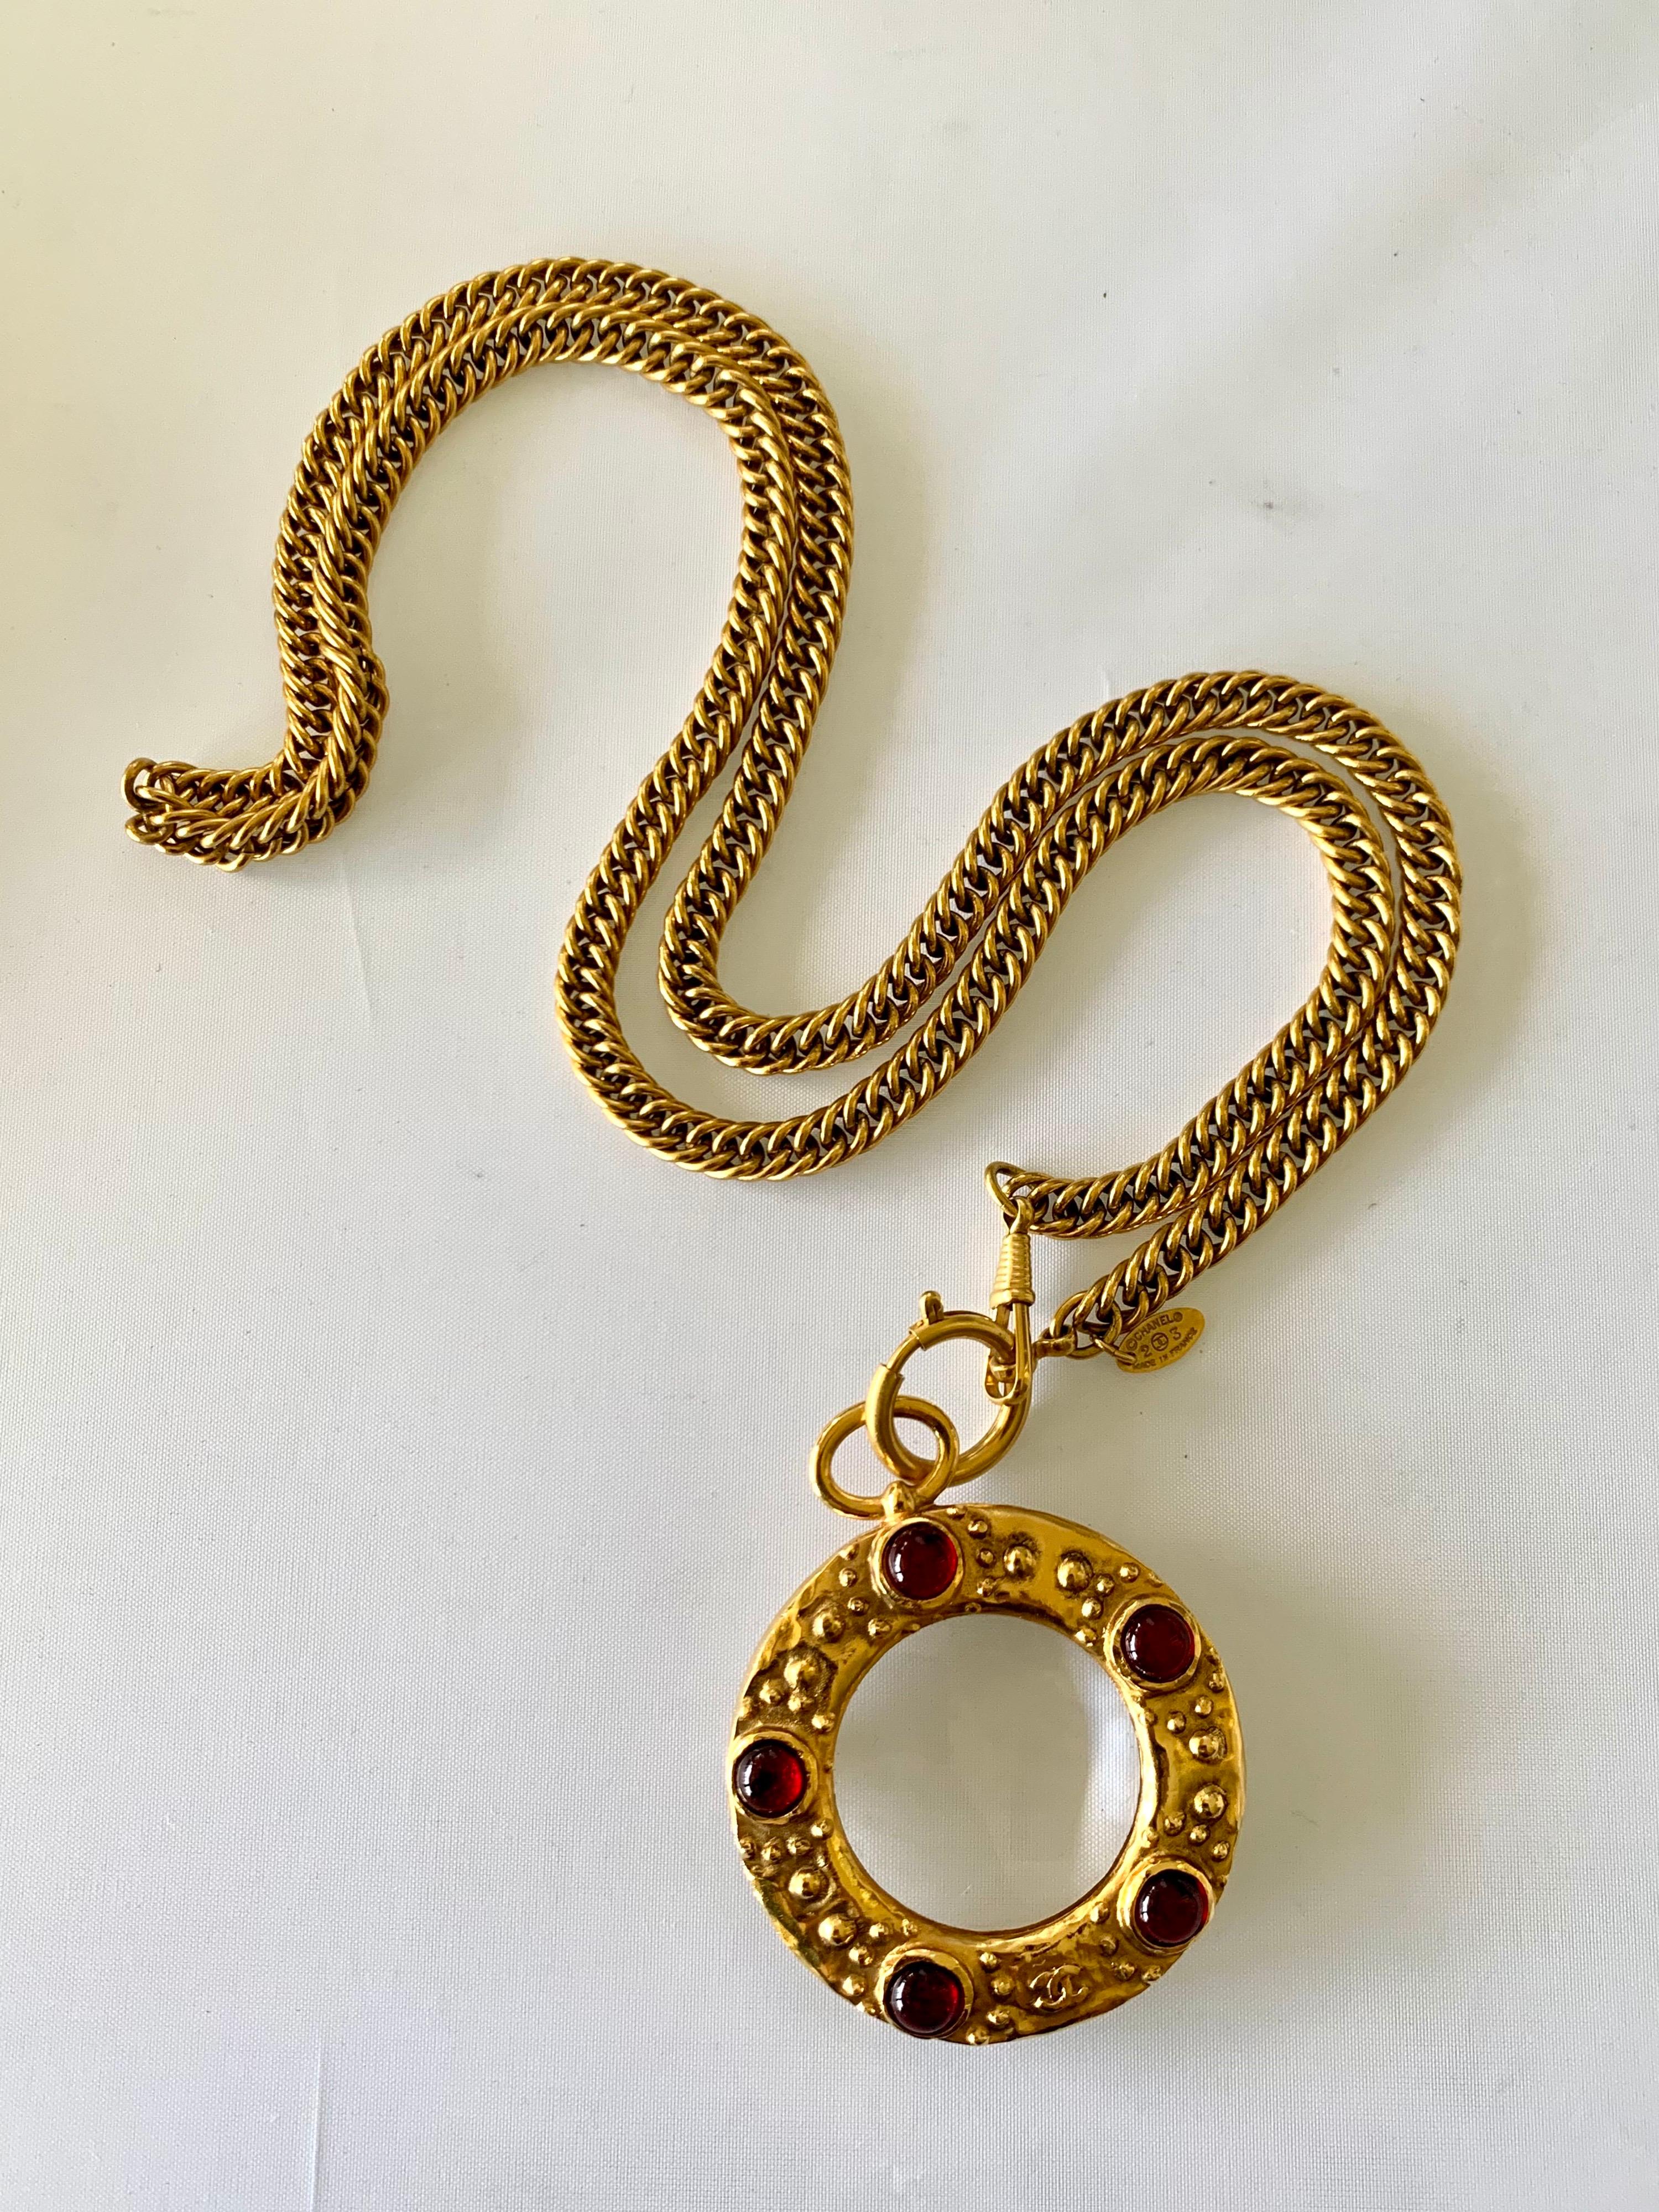 magnifying glass necklace vintage